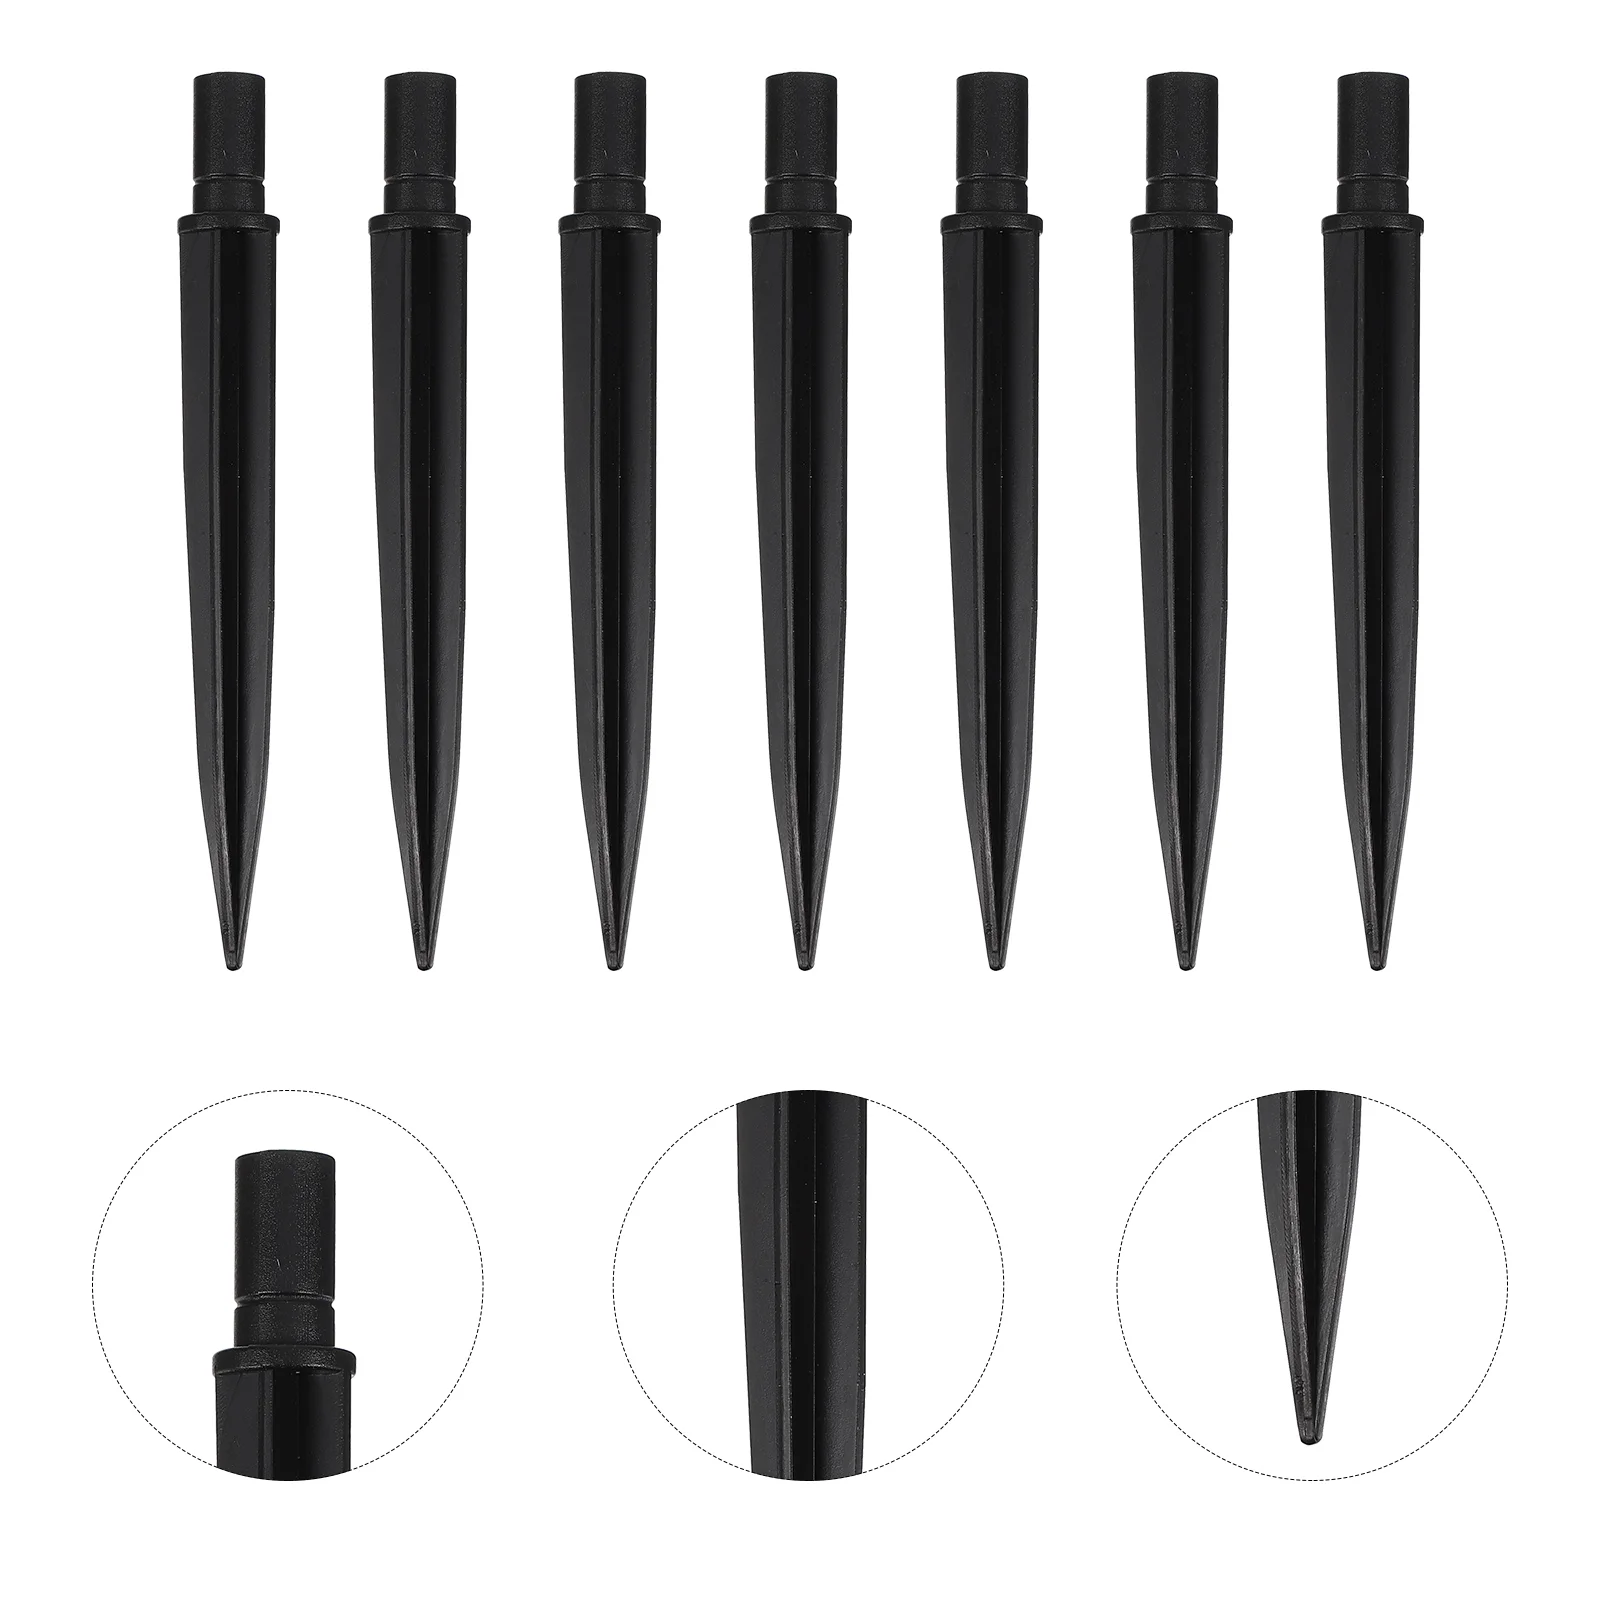 

20 Pcs Plastic Plug Landscape Lights Ground Spike Spikes Solar Flame Outdoor Lamps Stakes Garden Party Patio Flashlight